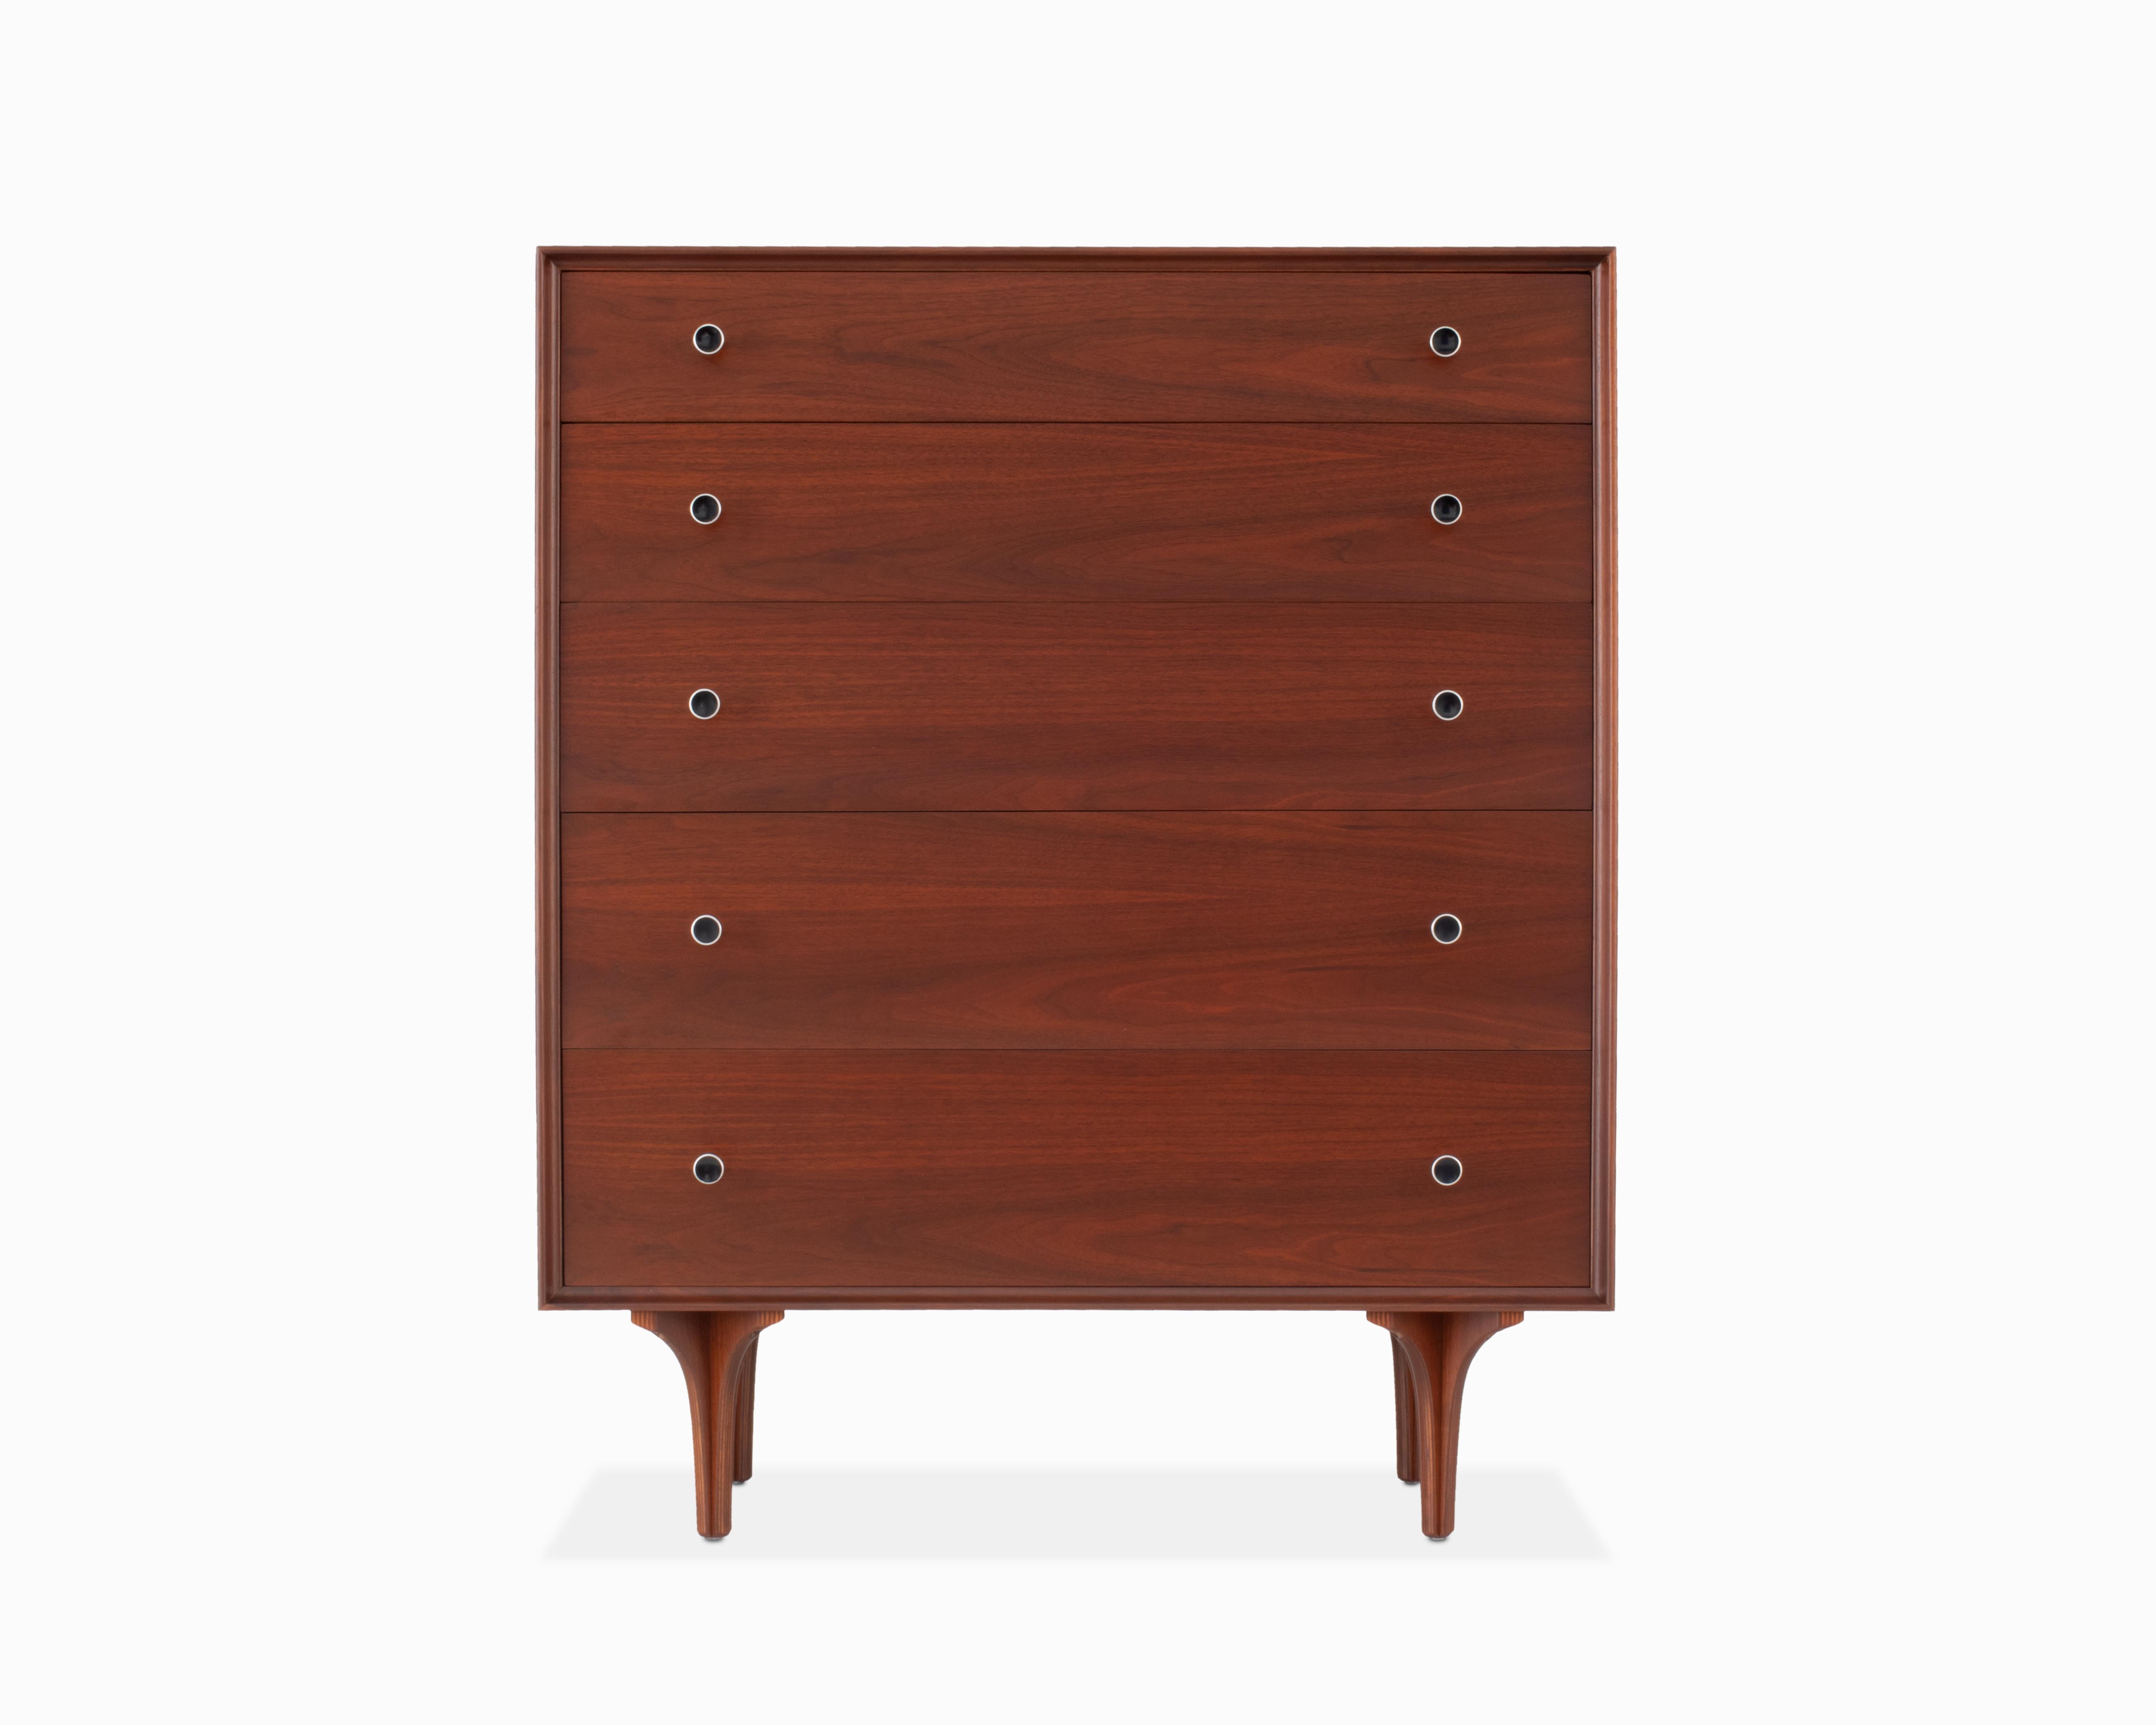 Here is a lovely and uncommon walnut dresser designed by Robert Baron for Glenn of California. It is in beautiful refinished condition, featuring 5 large drawers, hourglass aluminum pulls with enamel detail and uniquely sculptural plywood legs. We